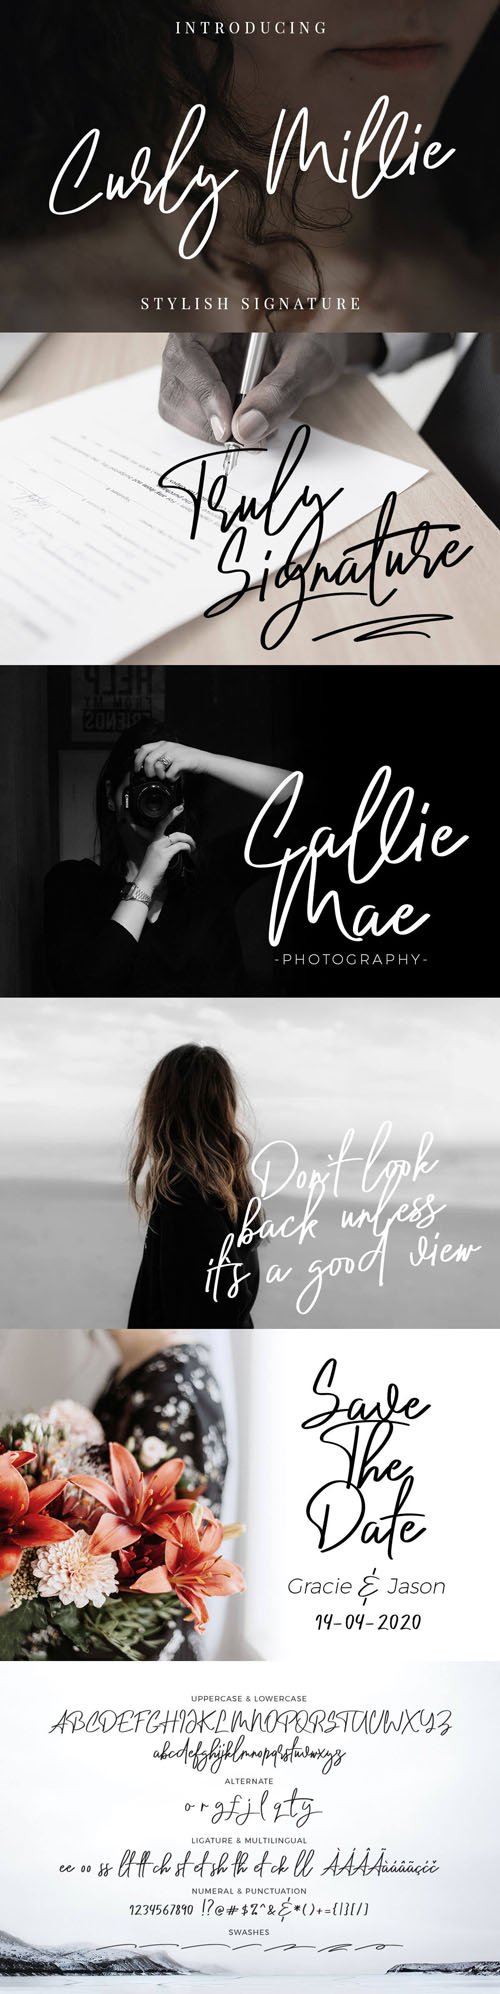 Curly Millie - Stylish Signiture Font